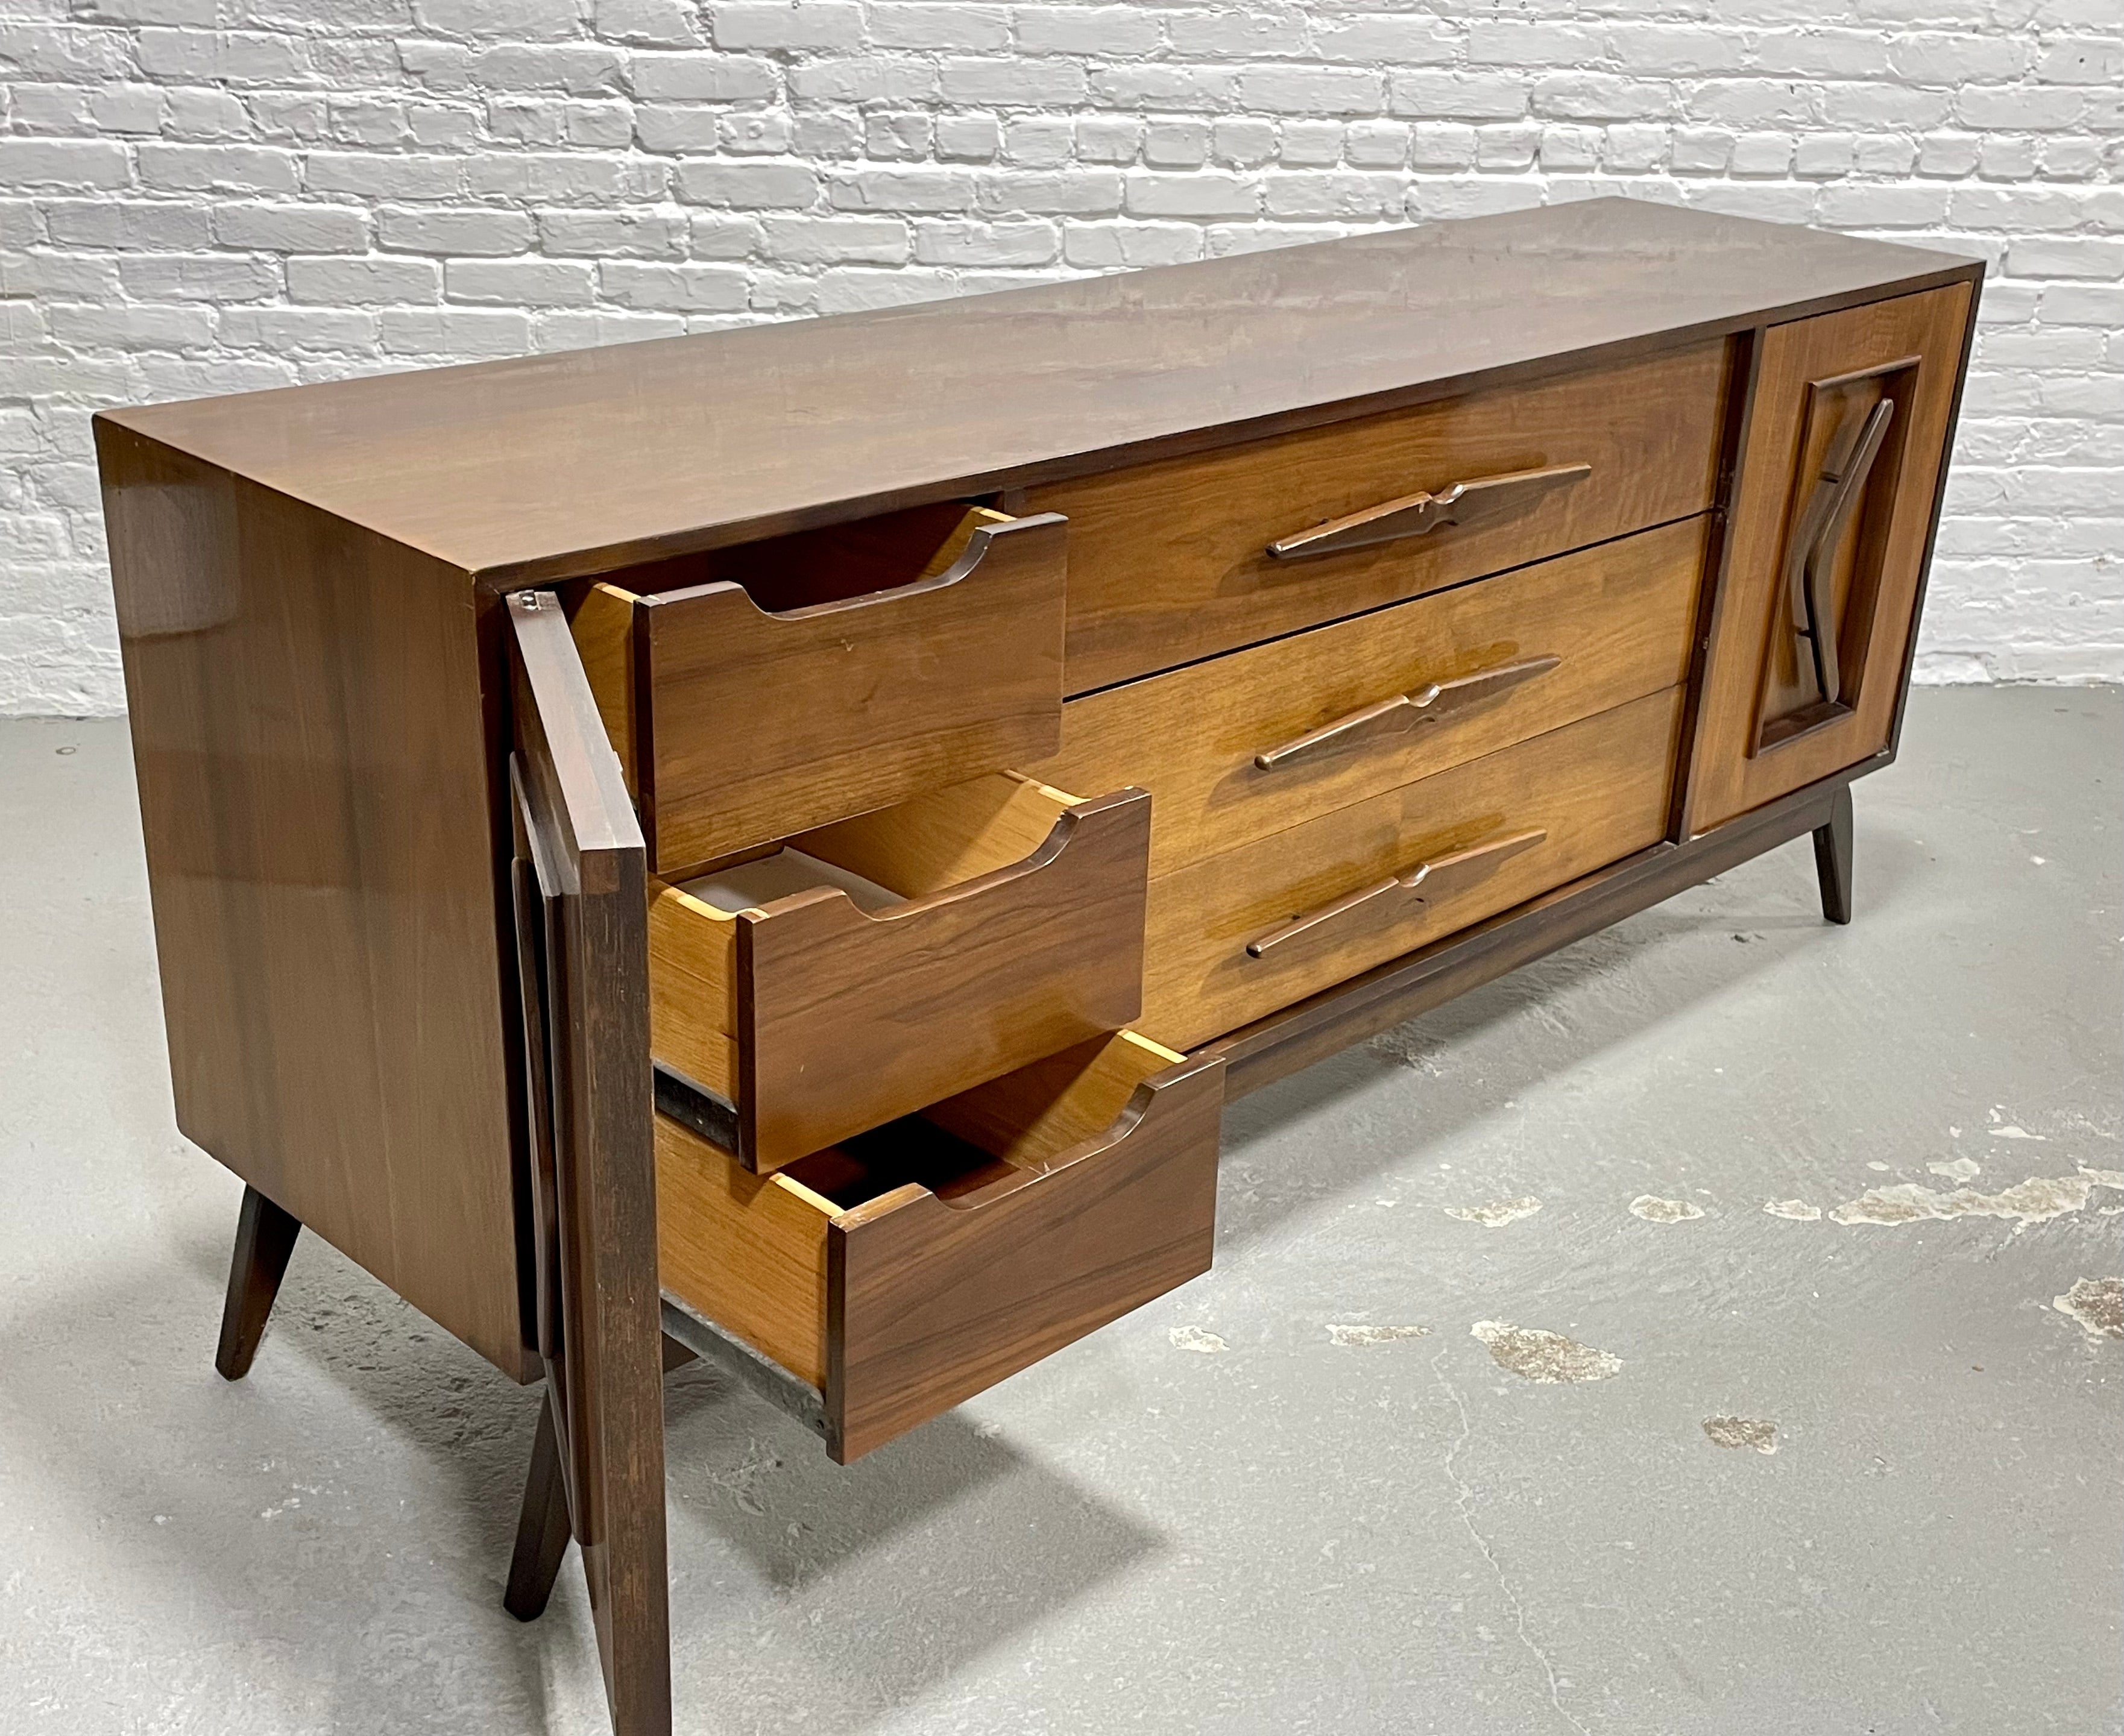 LONG + Sexy Mid Century MODERN Sculpted DRESSER / Credenza, c. 1960's